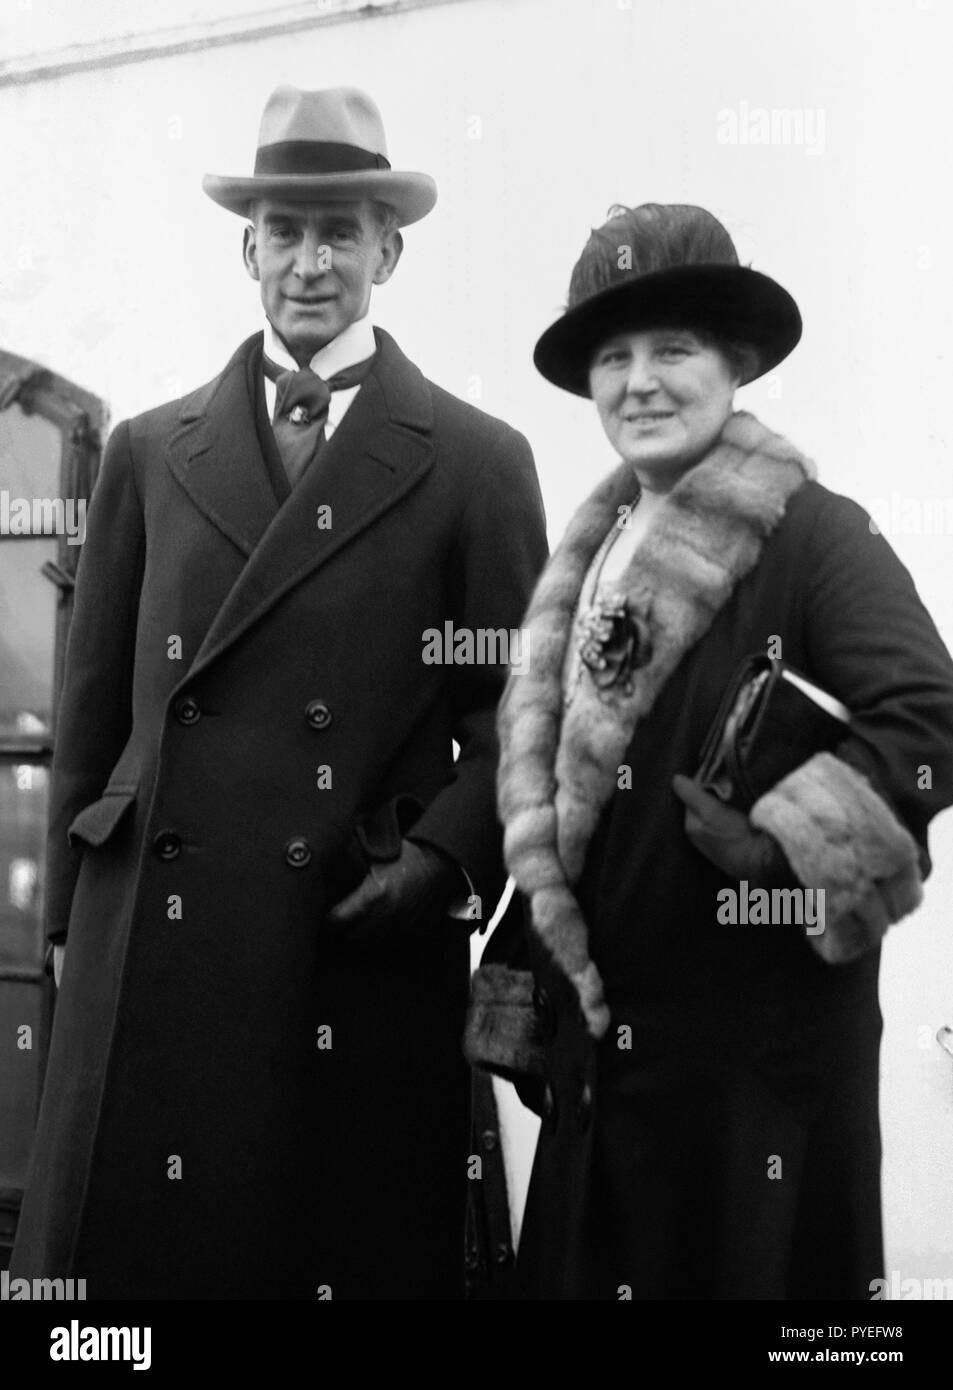 British artist Francis ('Frank') Owen Salisbury (1874-1962) and his wife, Alice. His work was in demand on both sides of the Atlantic and he was known as “Britain’s Painter Laureate”. Best known for his portraiture, Salisbury painted HM Queen Elizabeth II, President Franklin D. Roosevelt, and Sir Winston Churchill, including the iconic images The Siren Suit and Blood, Sweat and Tears. Stock Photo